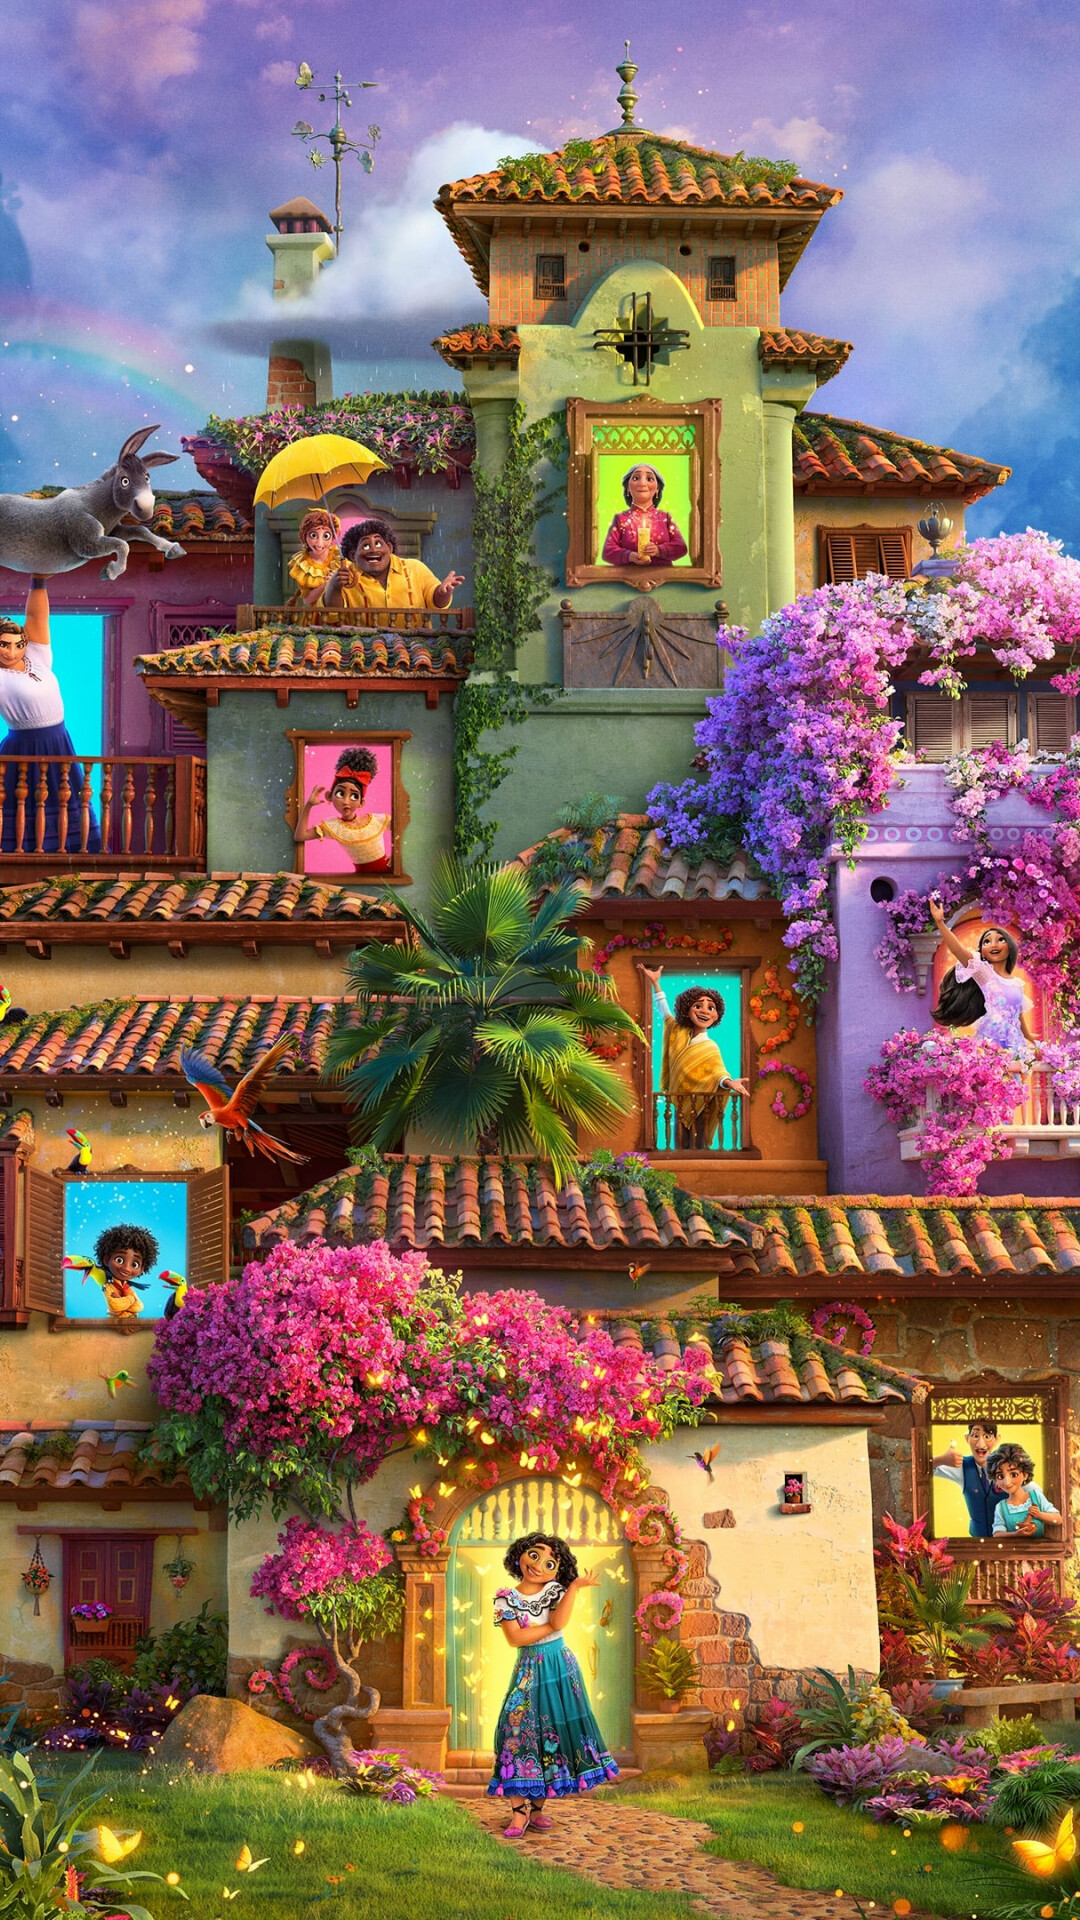 Encanto: The tale of the Madrigals, an extraordinary family who live in a wondrous, charmed place. 1080x1920 Full HD Wallpaper.